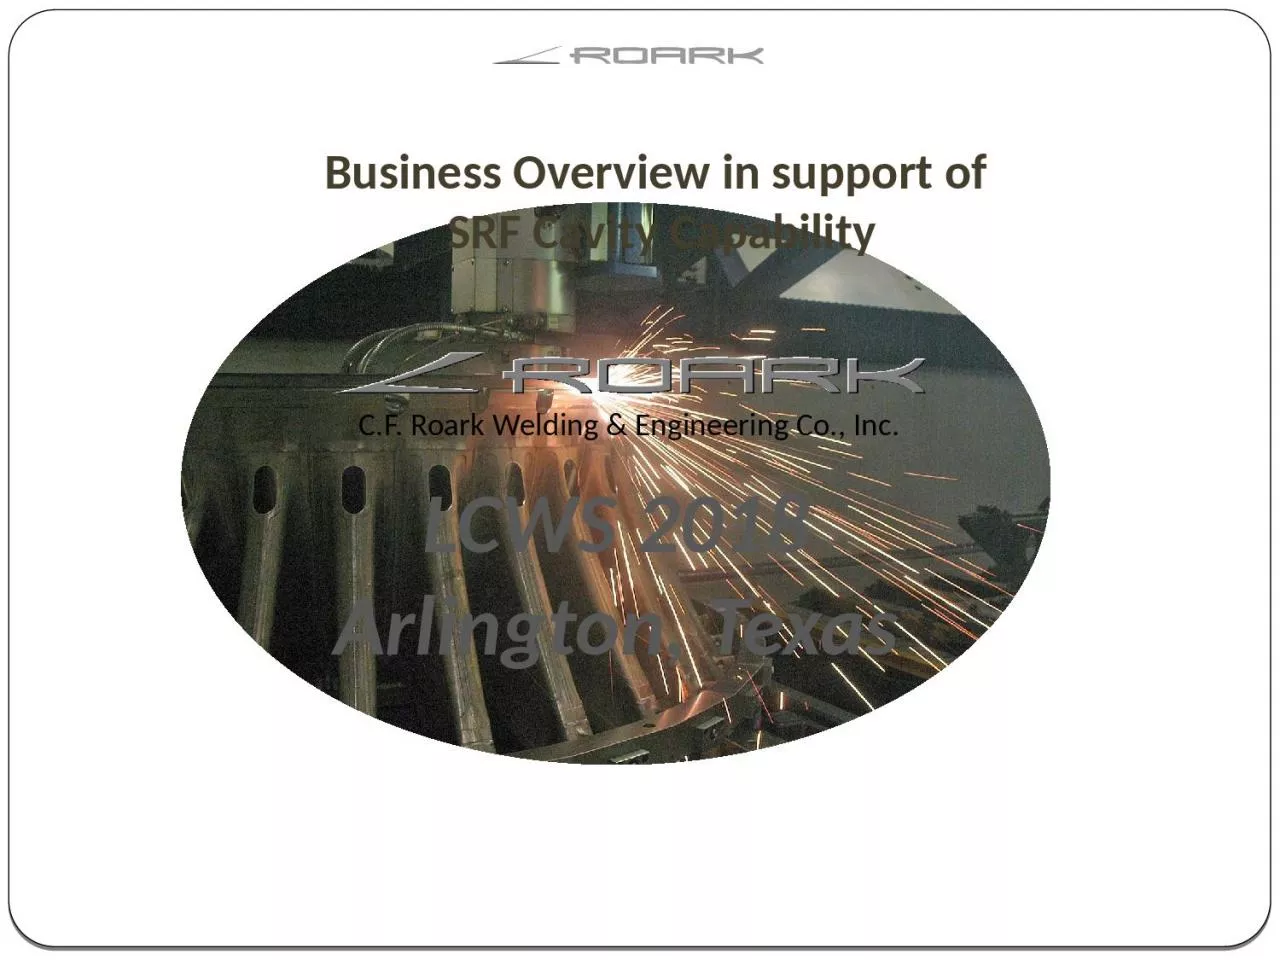 Business Overview in support of